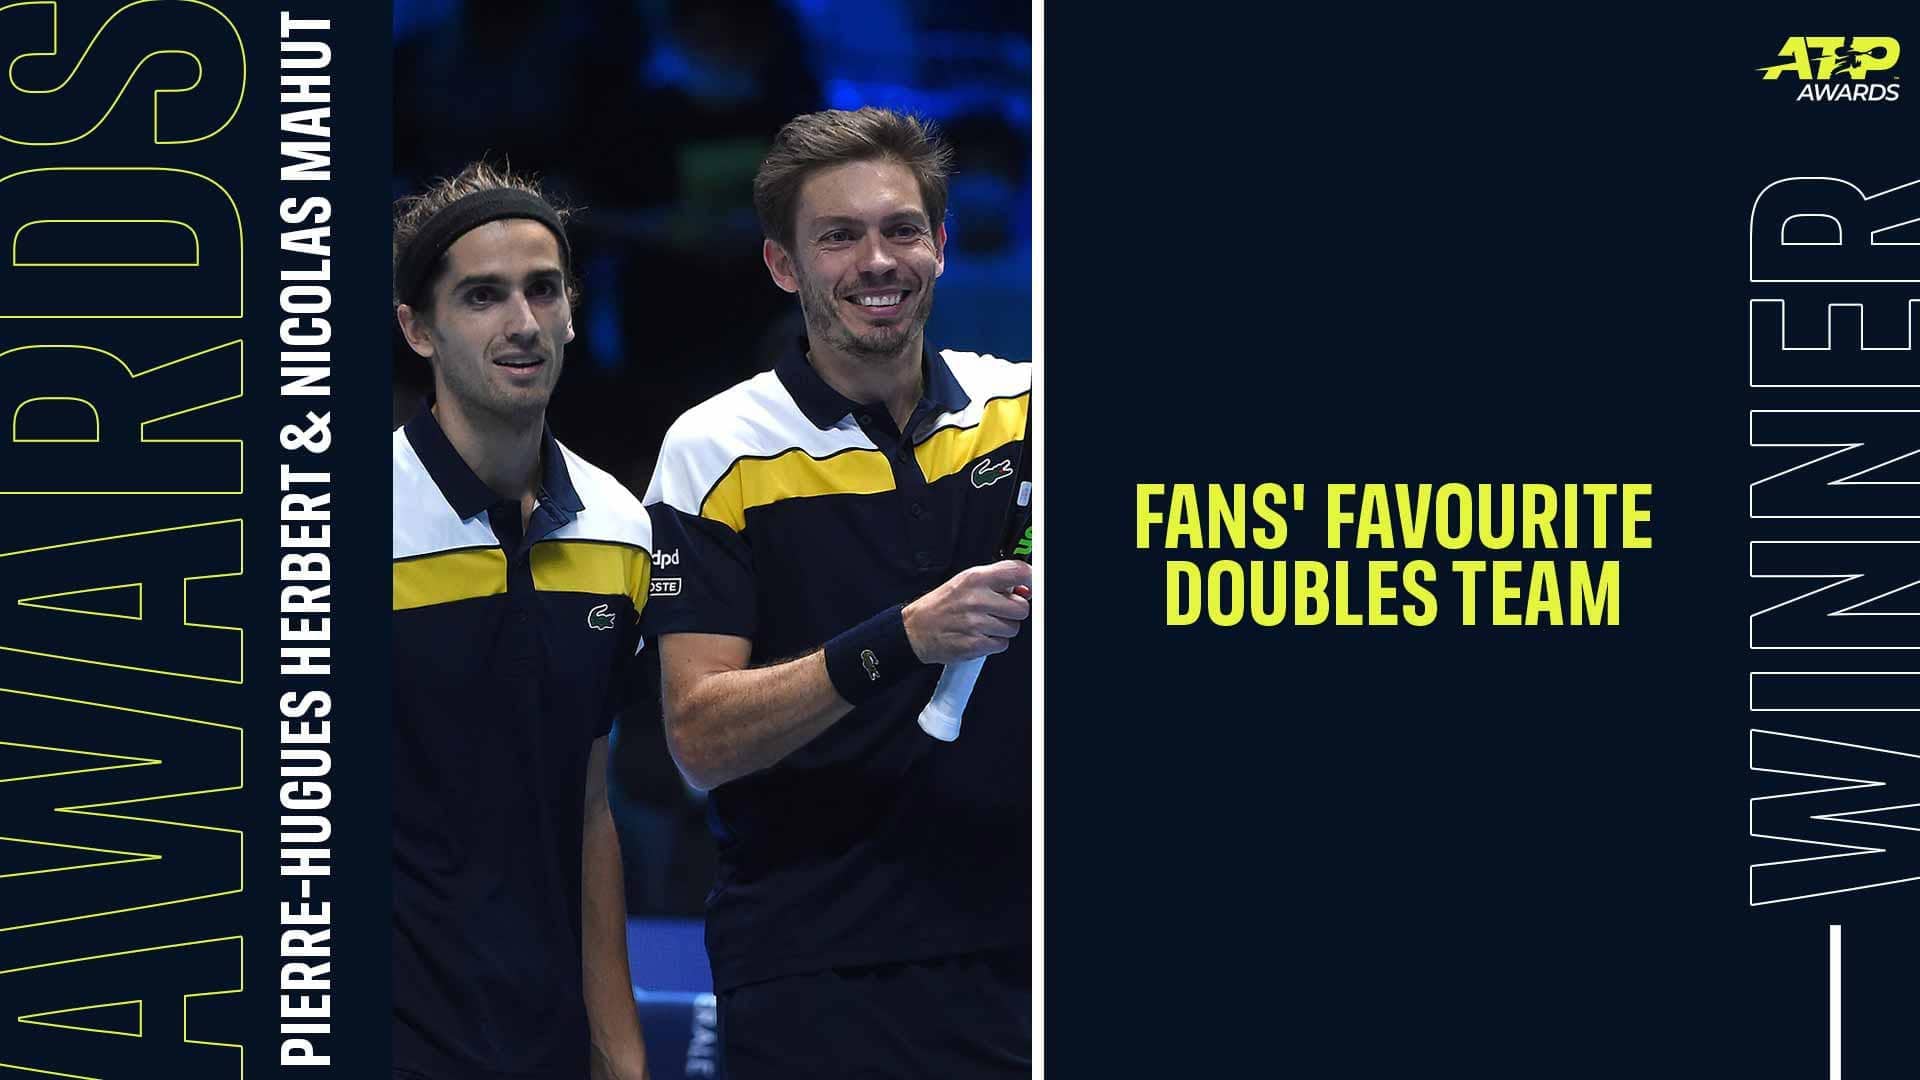 Frenchmen Pierre-Hugues Herbert & Nicolas Mahut have been voted as the Fans' Favourite doubles team in the 2021 ATP Awards.